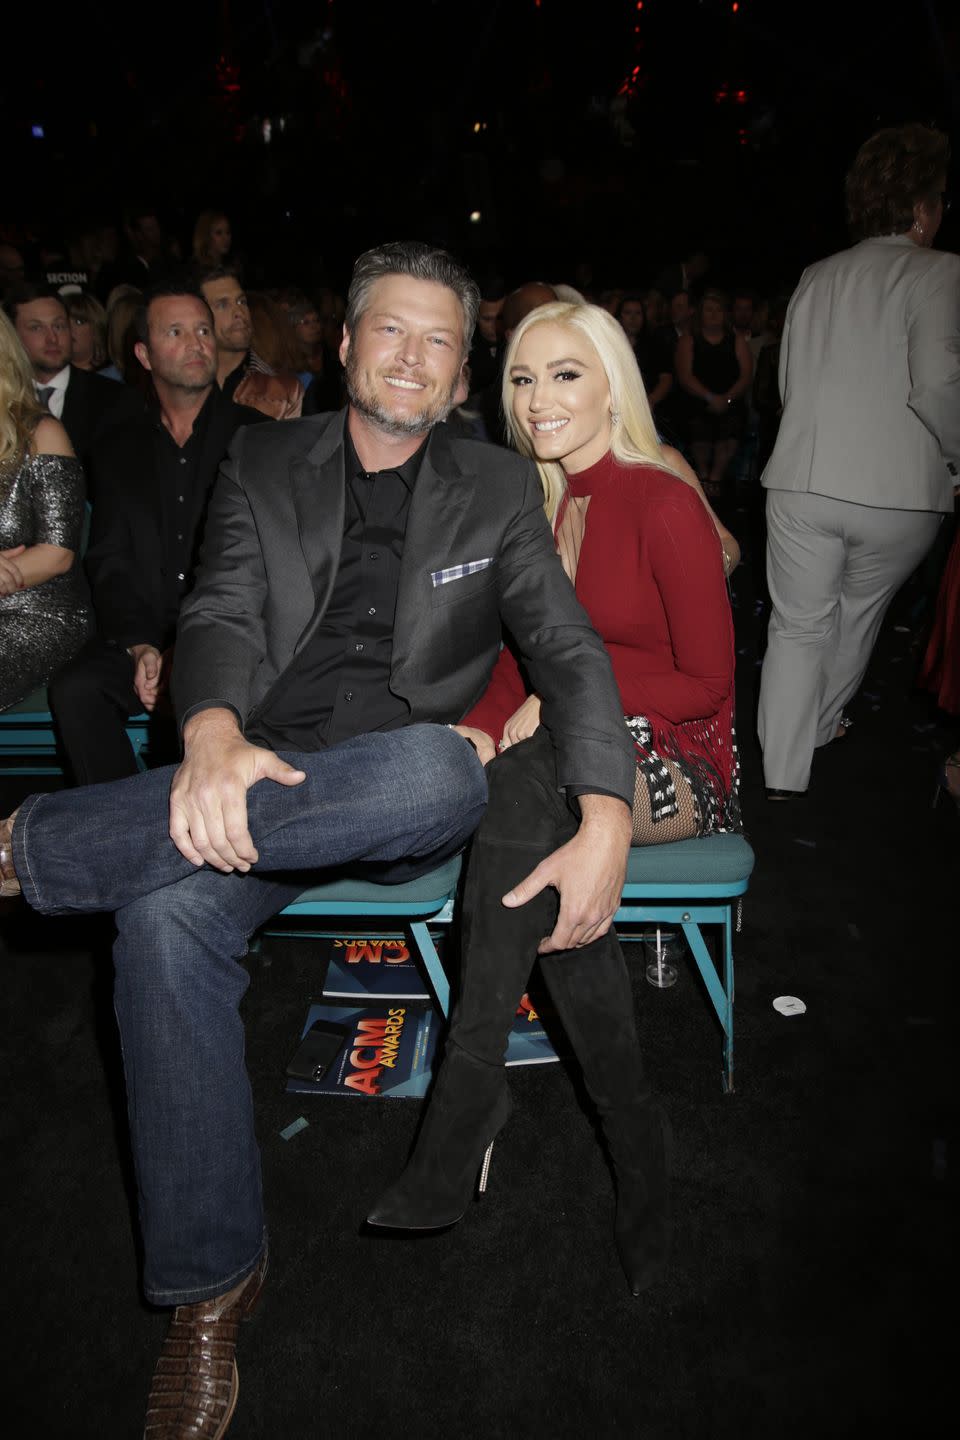 3) Blake and Gwen are totally devoted to each other.